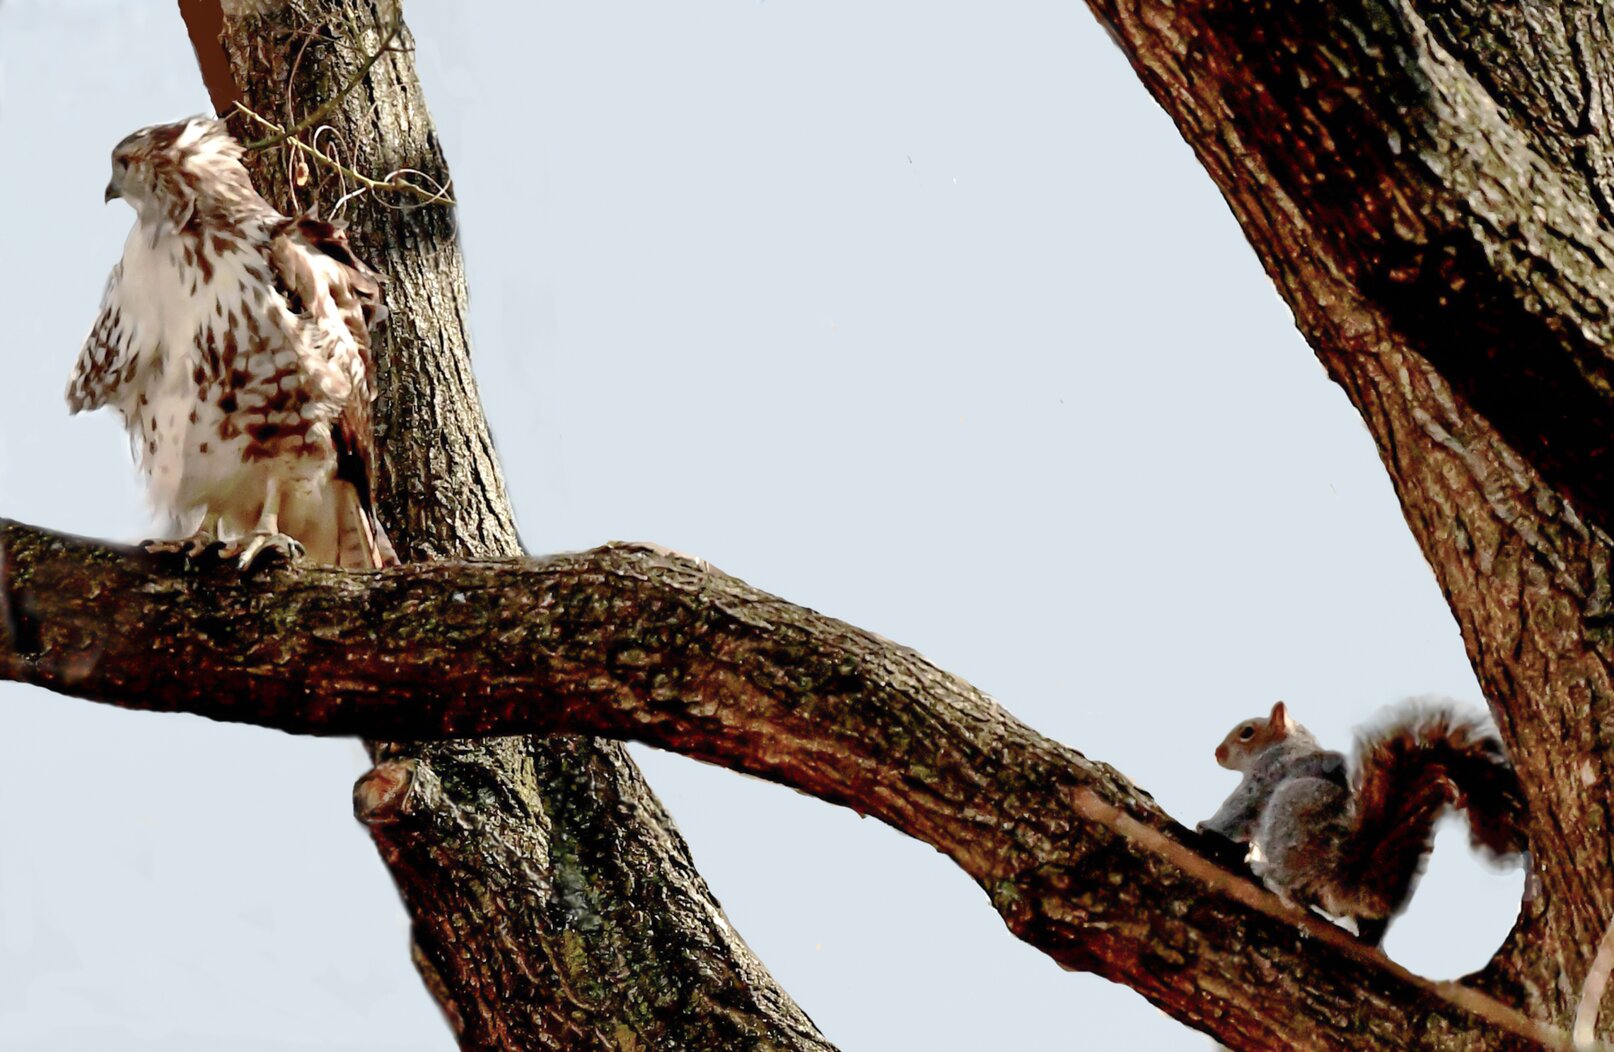 A Gray Squirrel tempts fate in The Battery (as a Red-tailed Hawk seems not to notice). Photo: Gail Karlsson